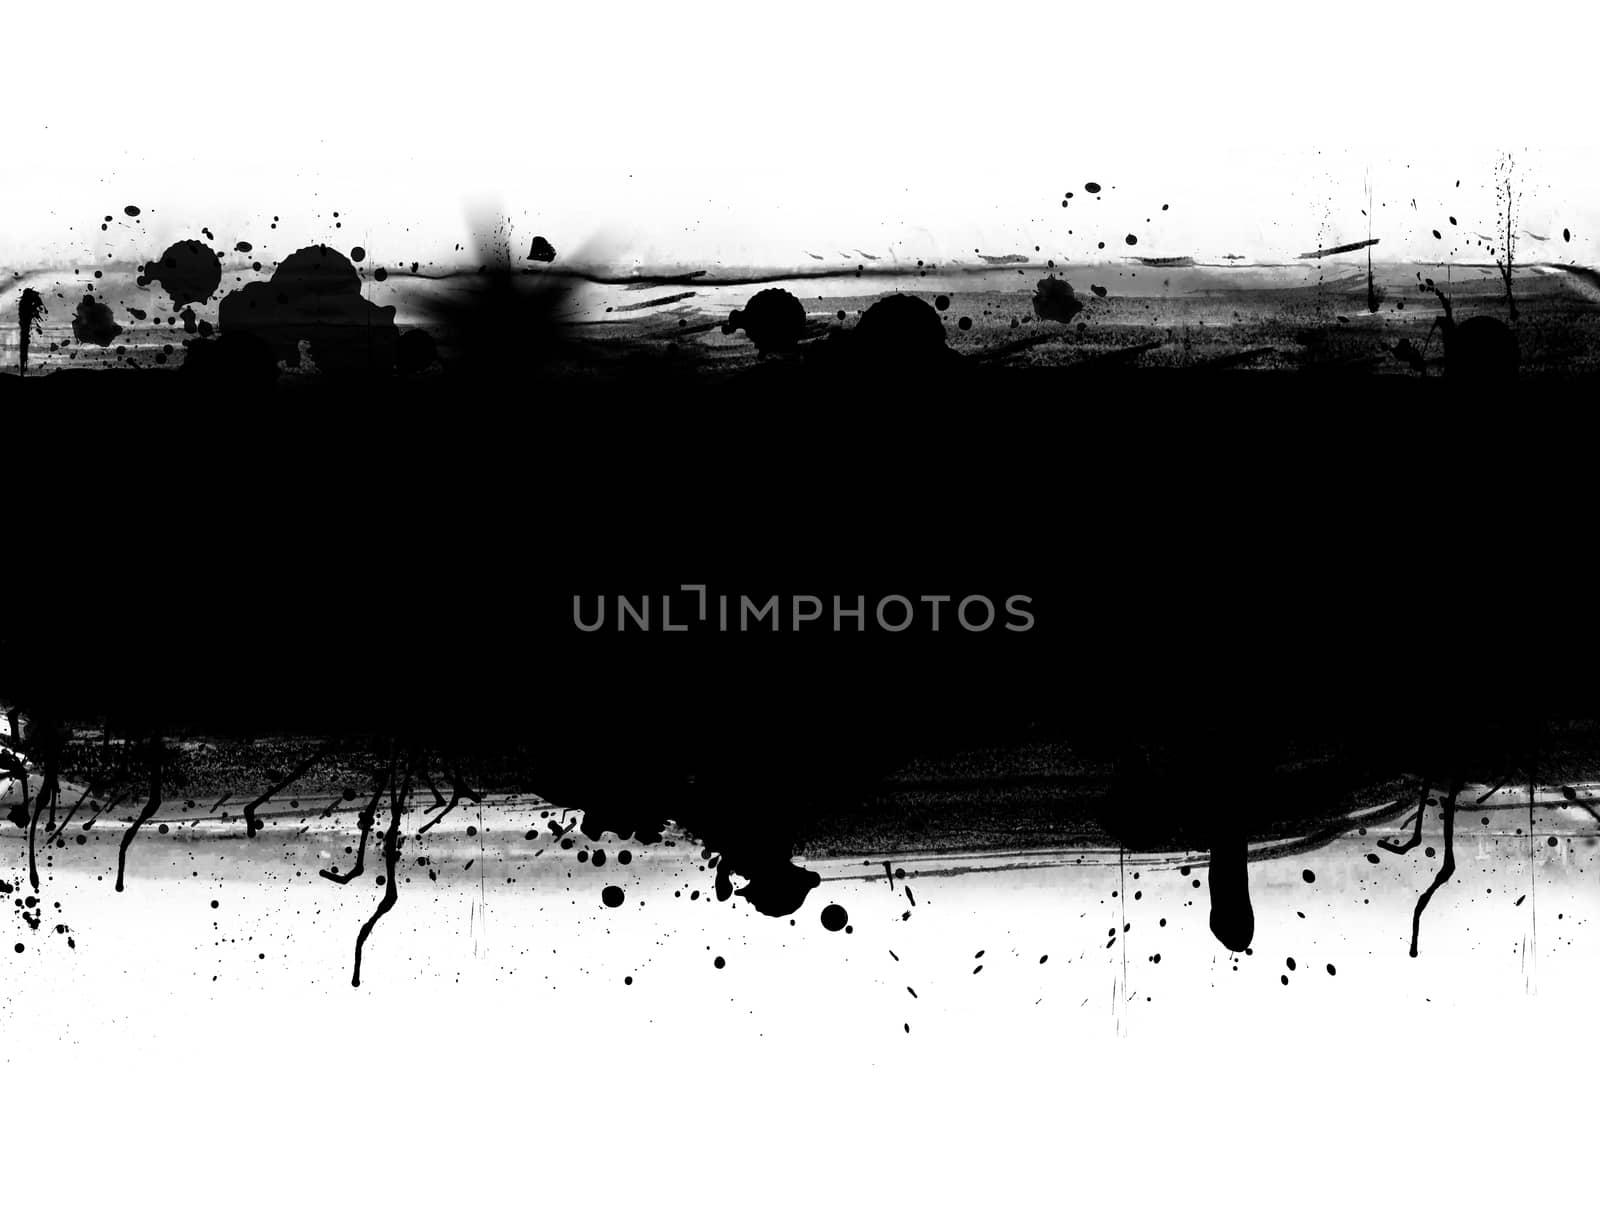 Abstract grunge banner by wyoosumran